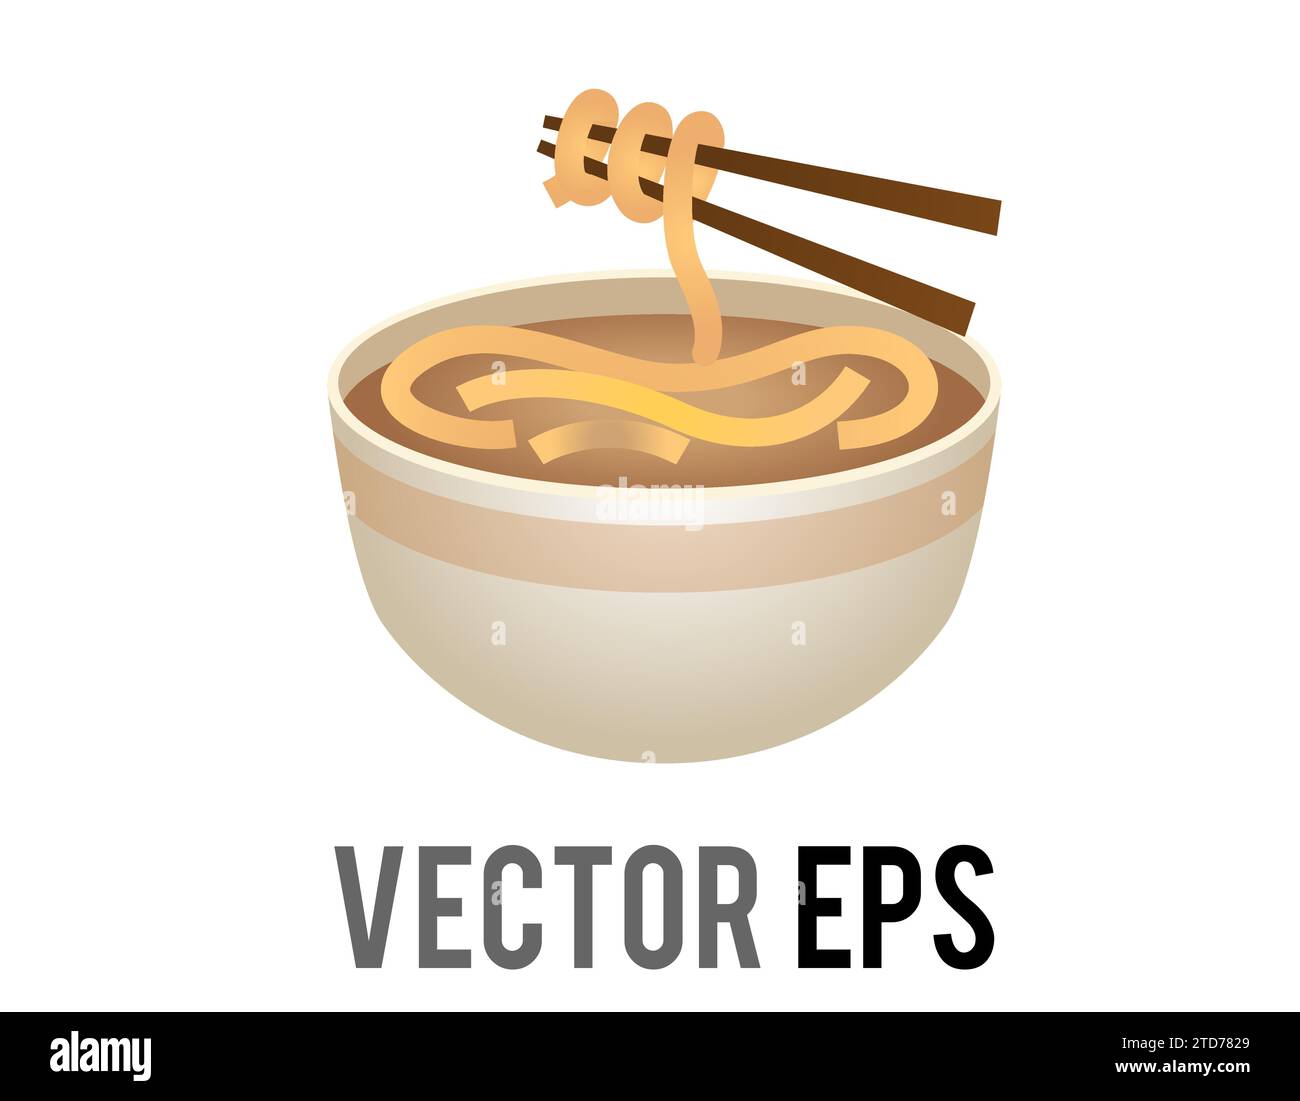 A bowl of steaming hot food icon, depicted as Japanese ramen noodles with chopsticks Stock Vector